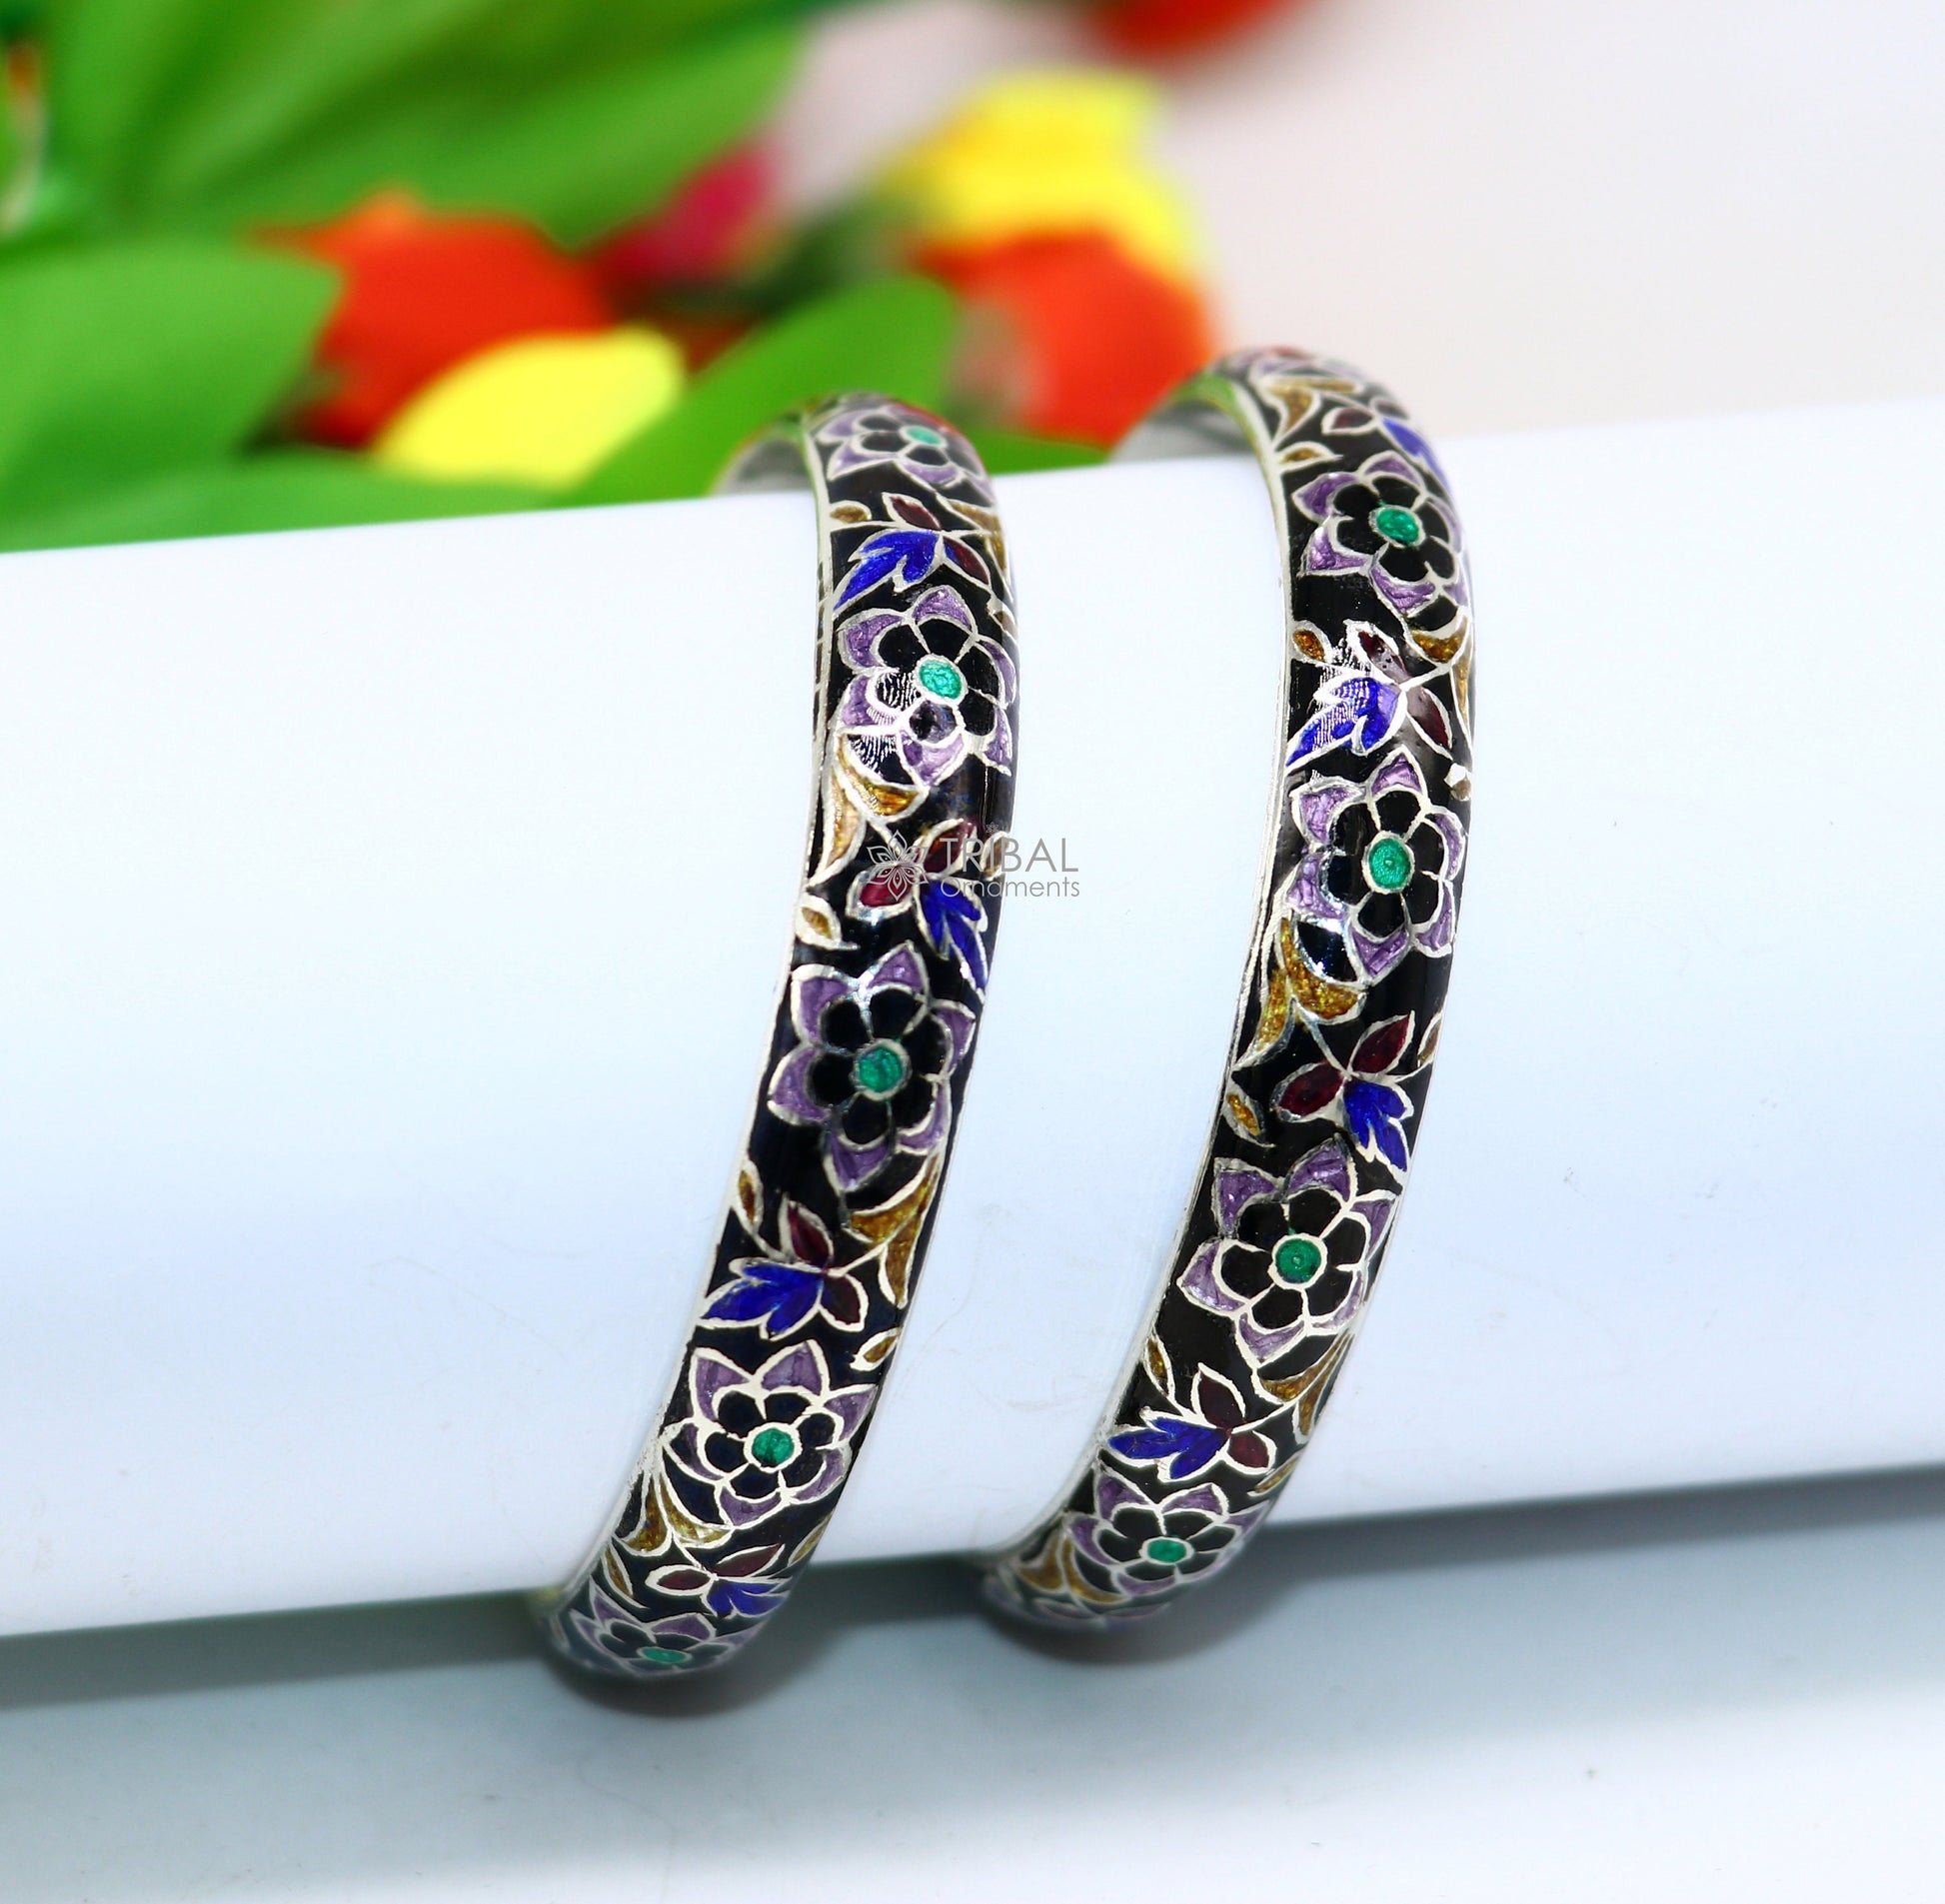 925 Sterling silver handmade amazing meenakari (color enamel )bangle bracelet vintage Cultral trendy style jewelry from india nba353 - TRIBAL ORNAMENTS